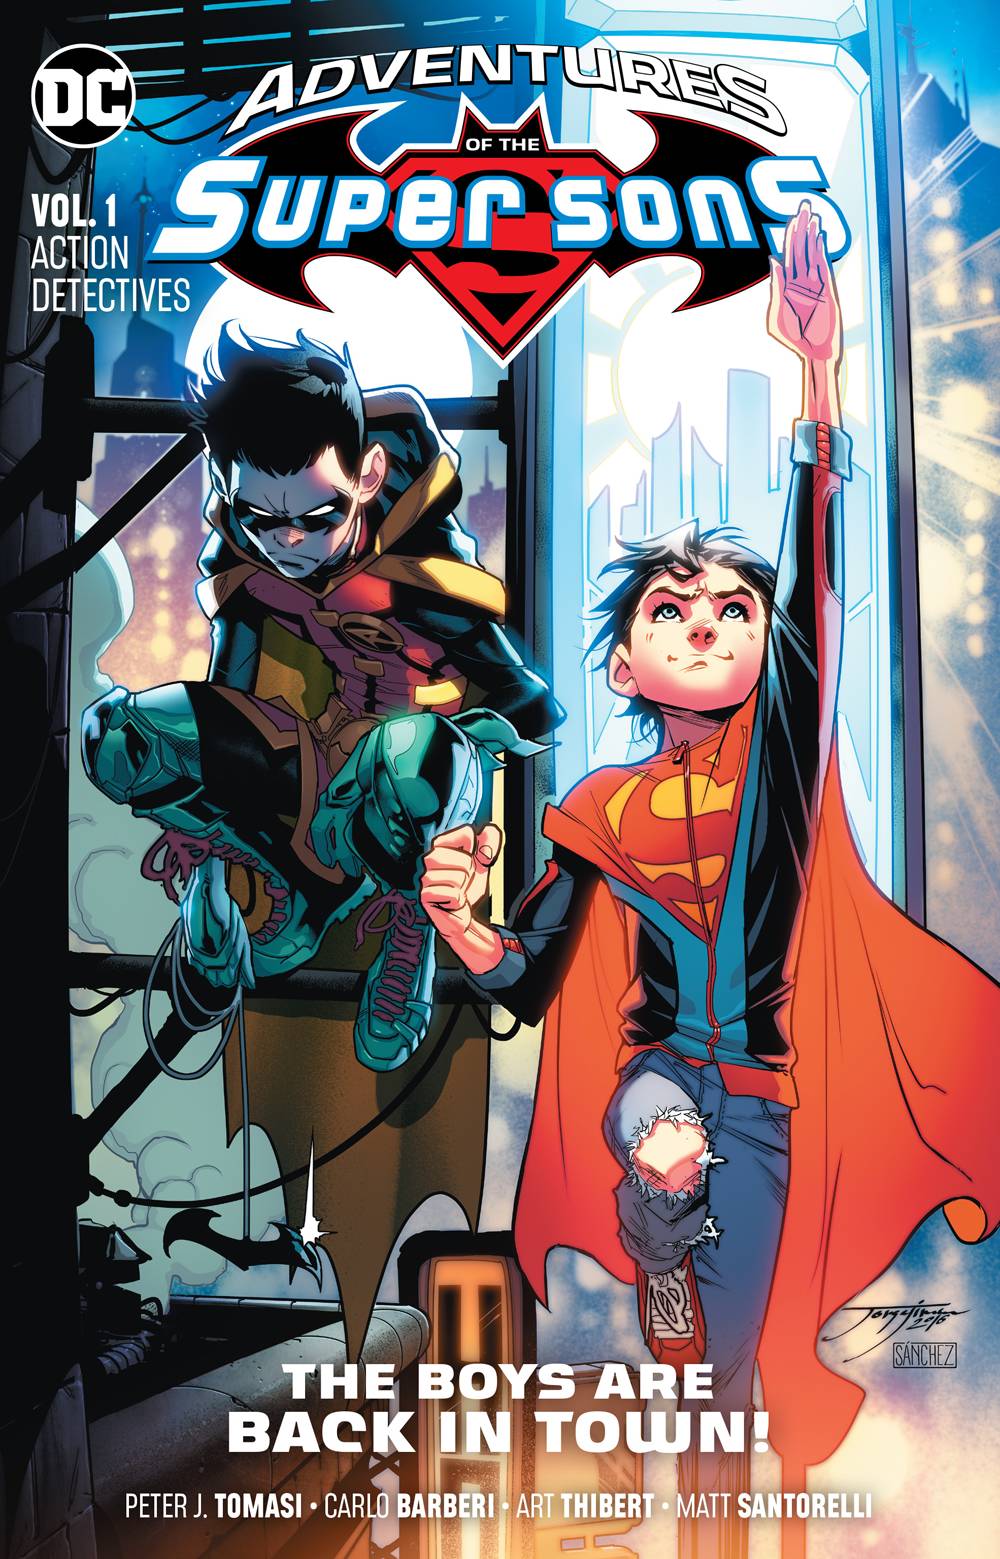 Adventures of the Super Sons Graphic Novel Volume 1 Action Detective